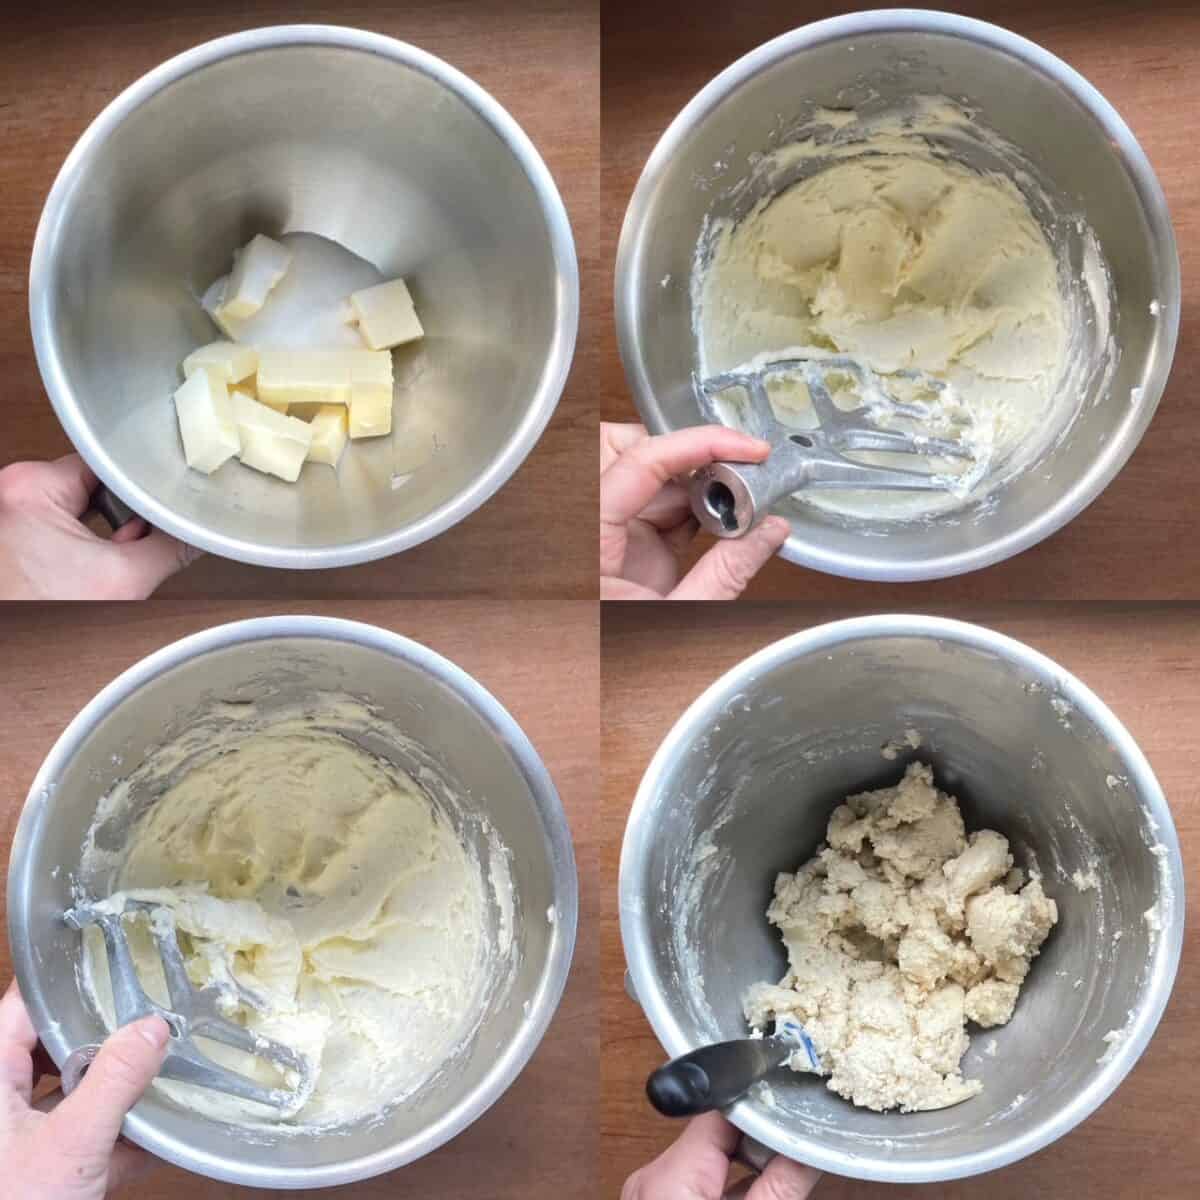 four panels showing steps in making dough for the almond flour shortbread cookies.